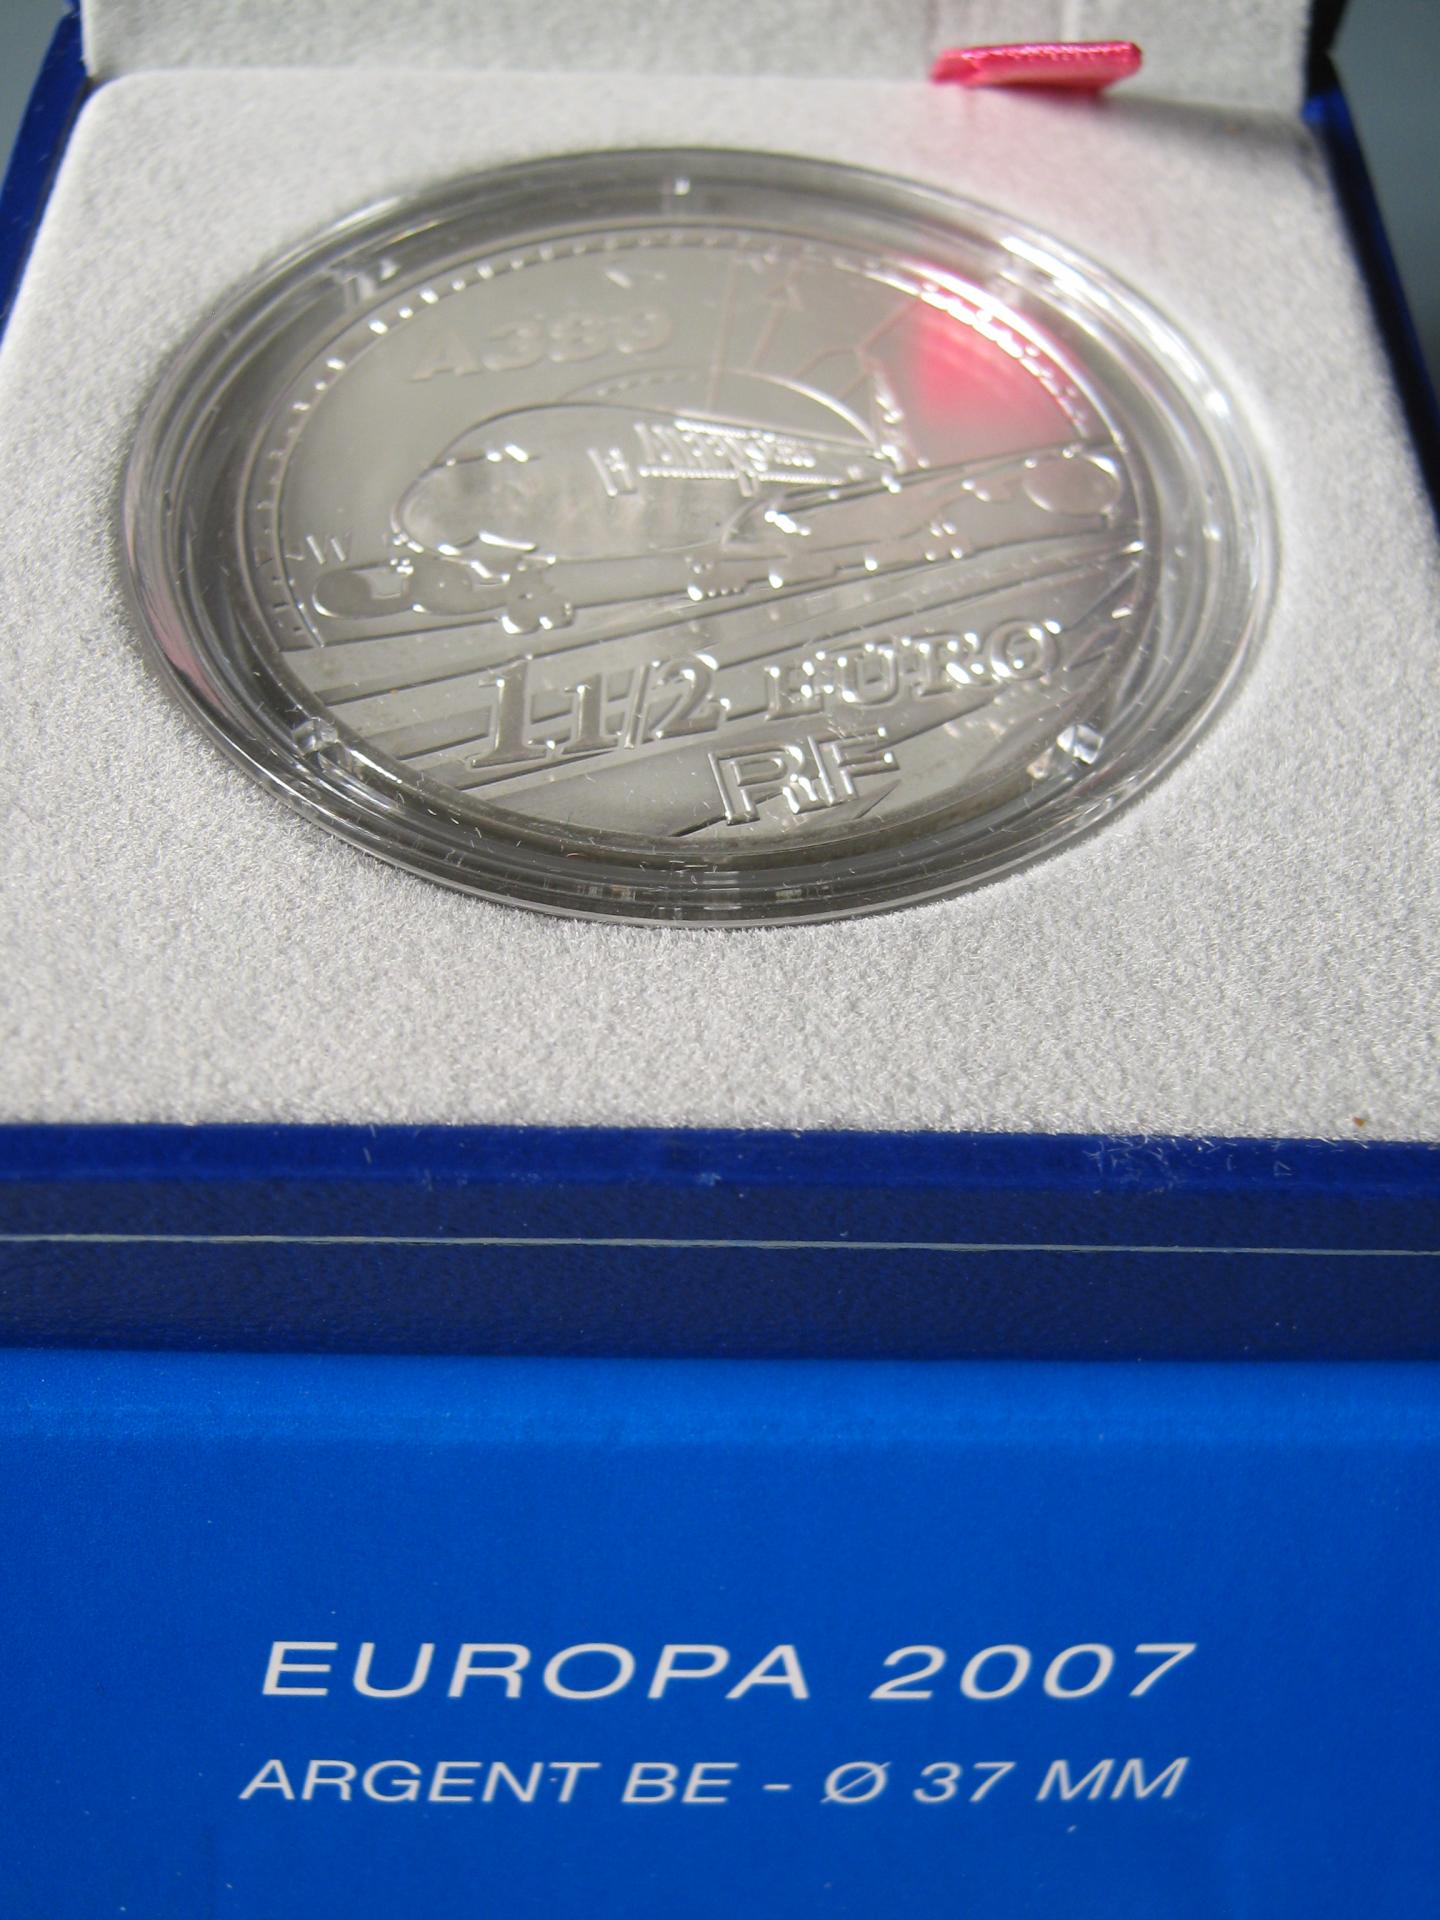 1 5 2007 france europa airbus a